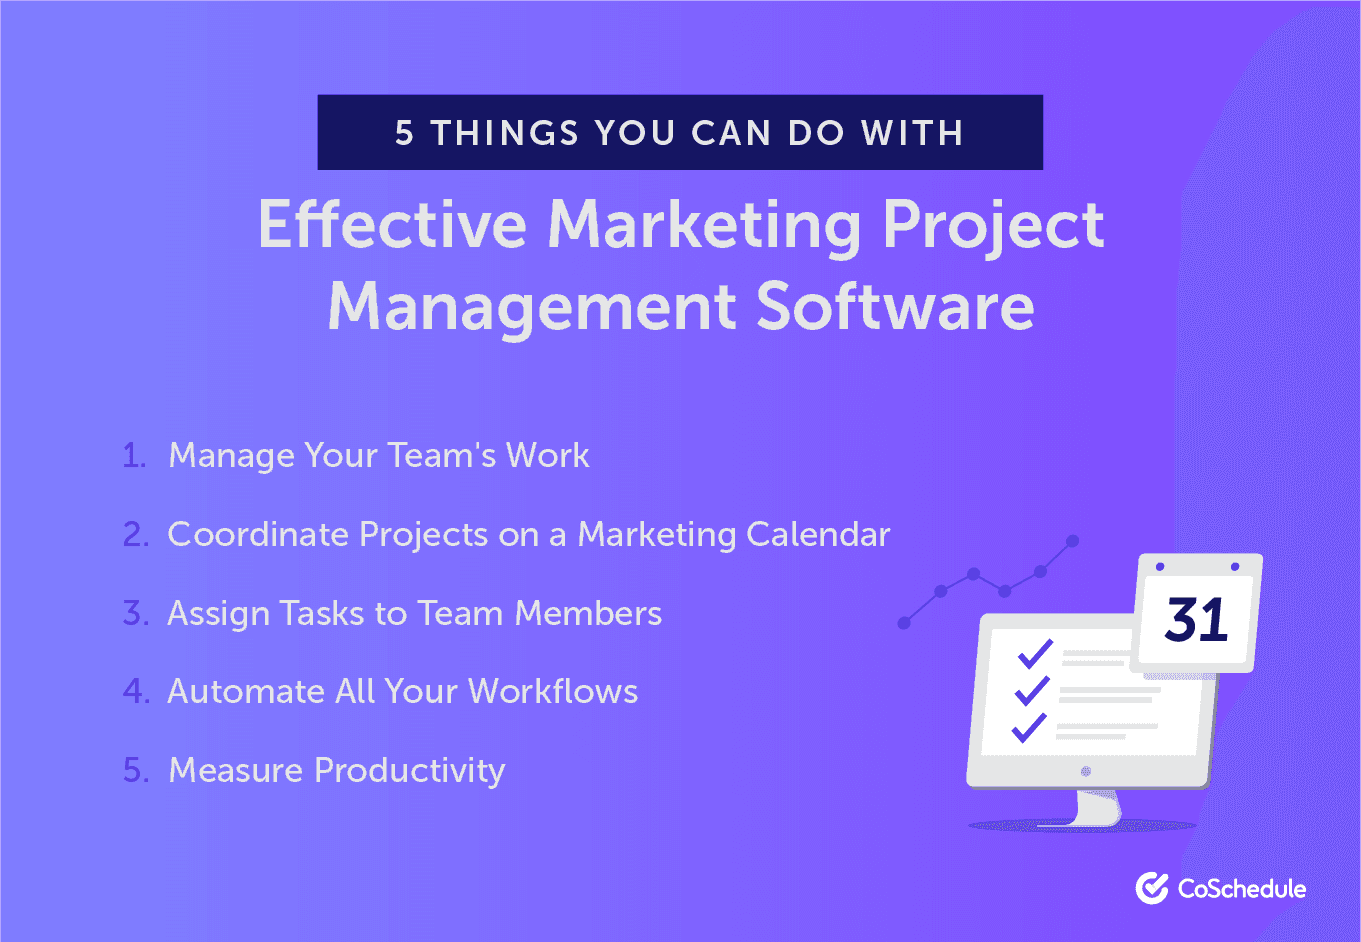 5 Things You Can Do With Effective Marketing Project Management Software